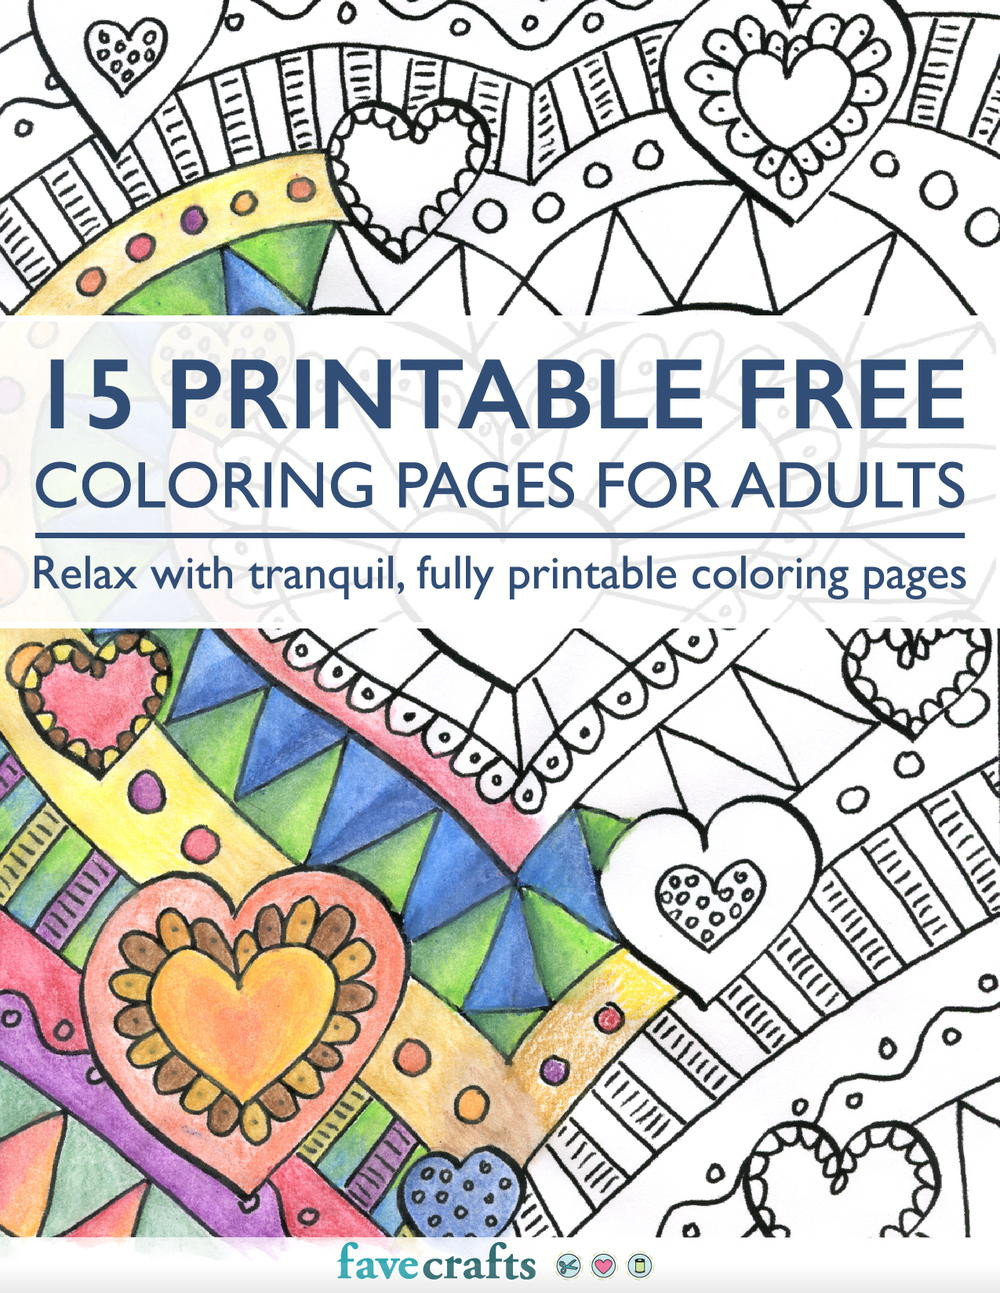 Free Printable Coloring Pages Adult
 15 Printable Free Coloring Pages for Adults [PDF